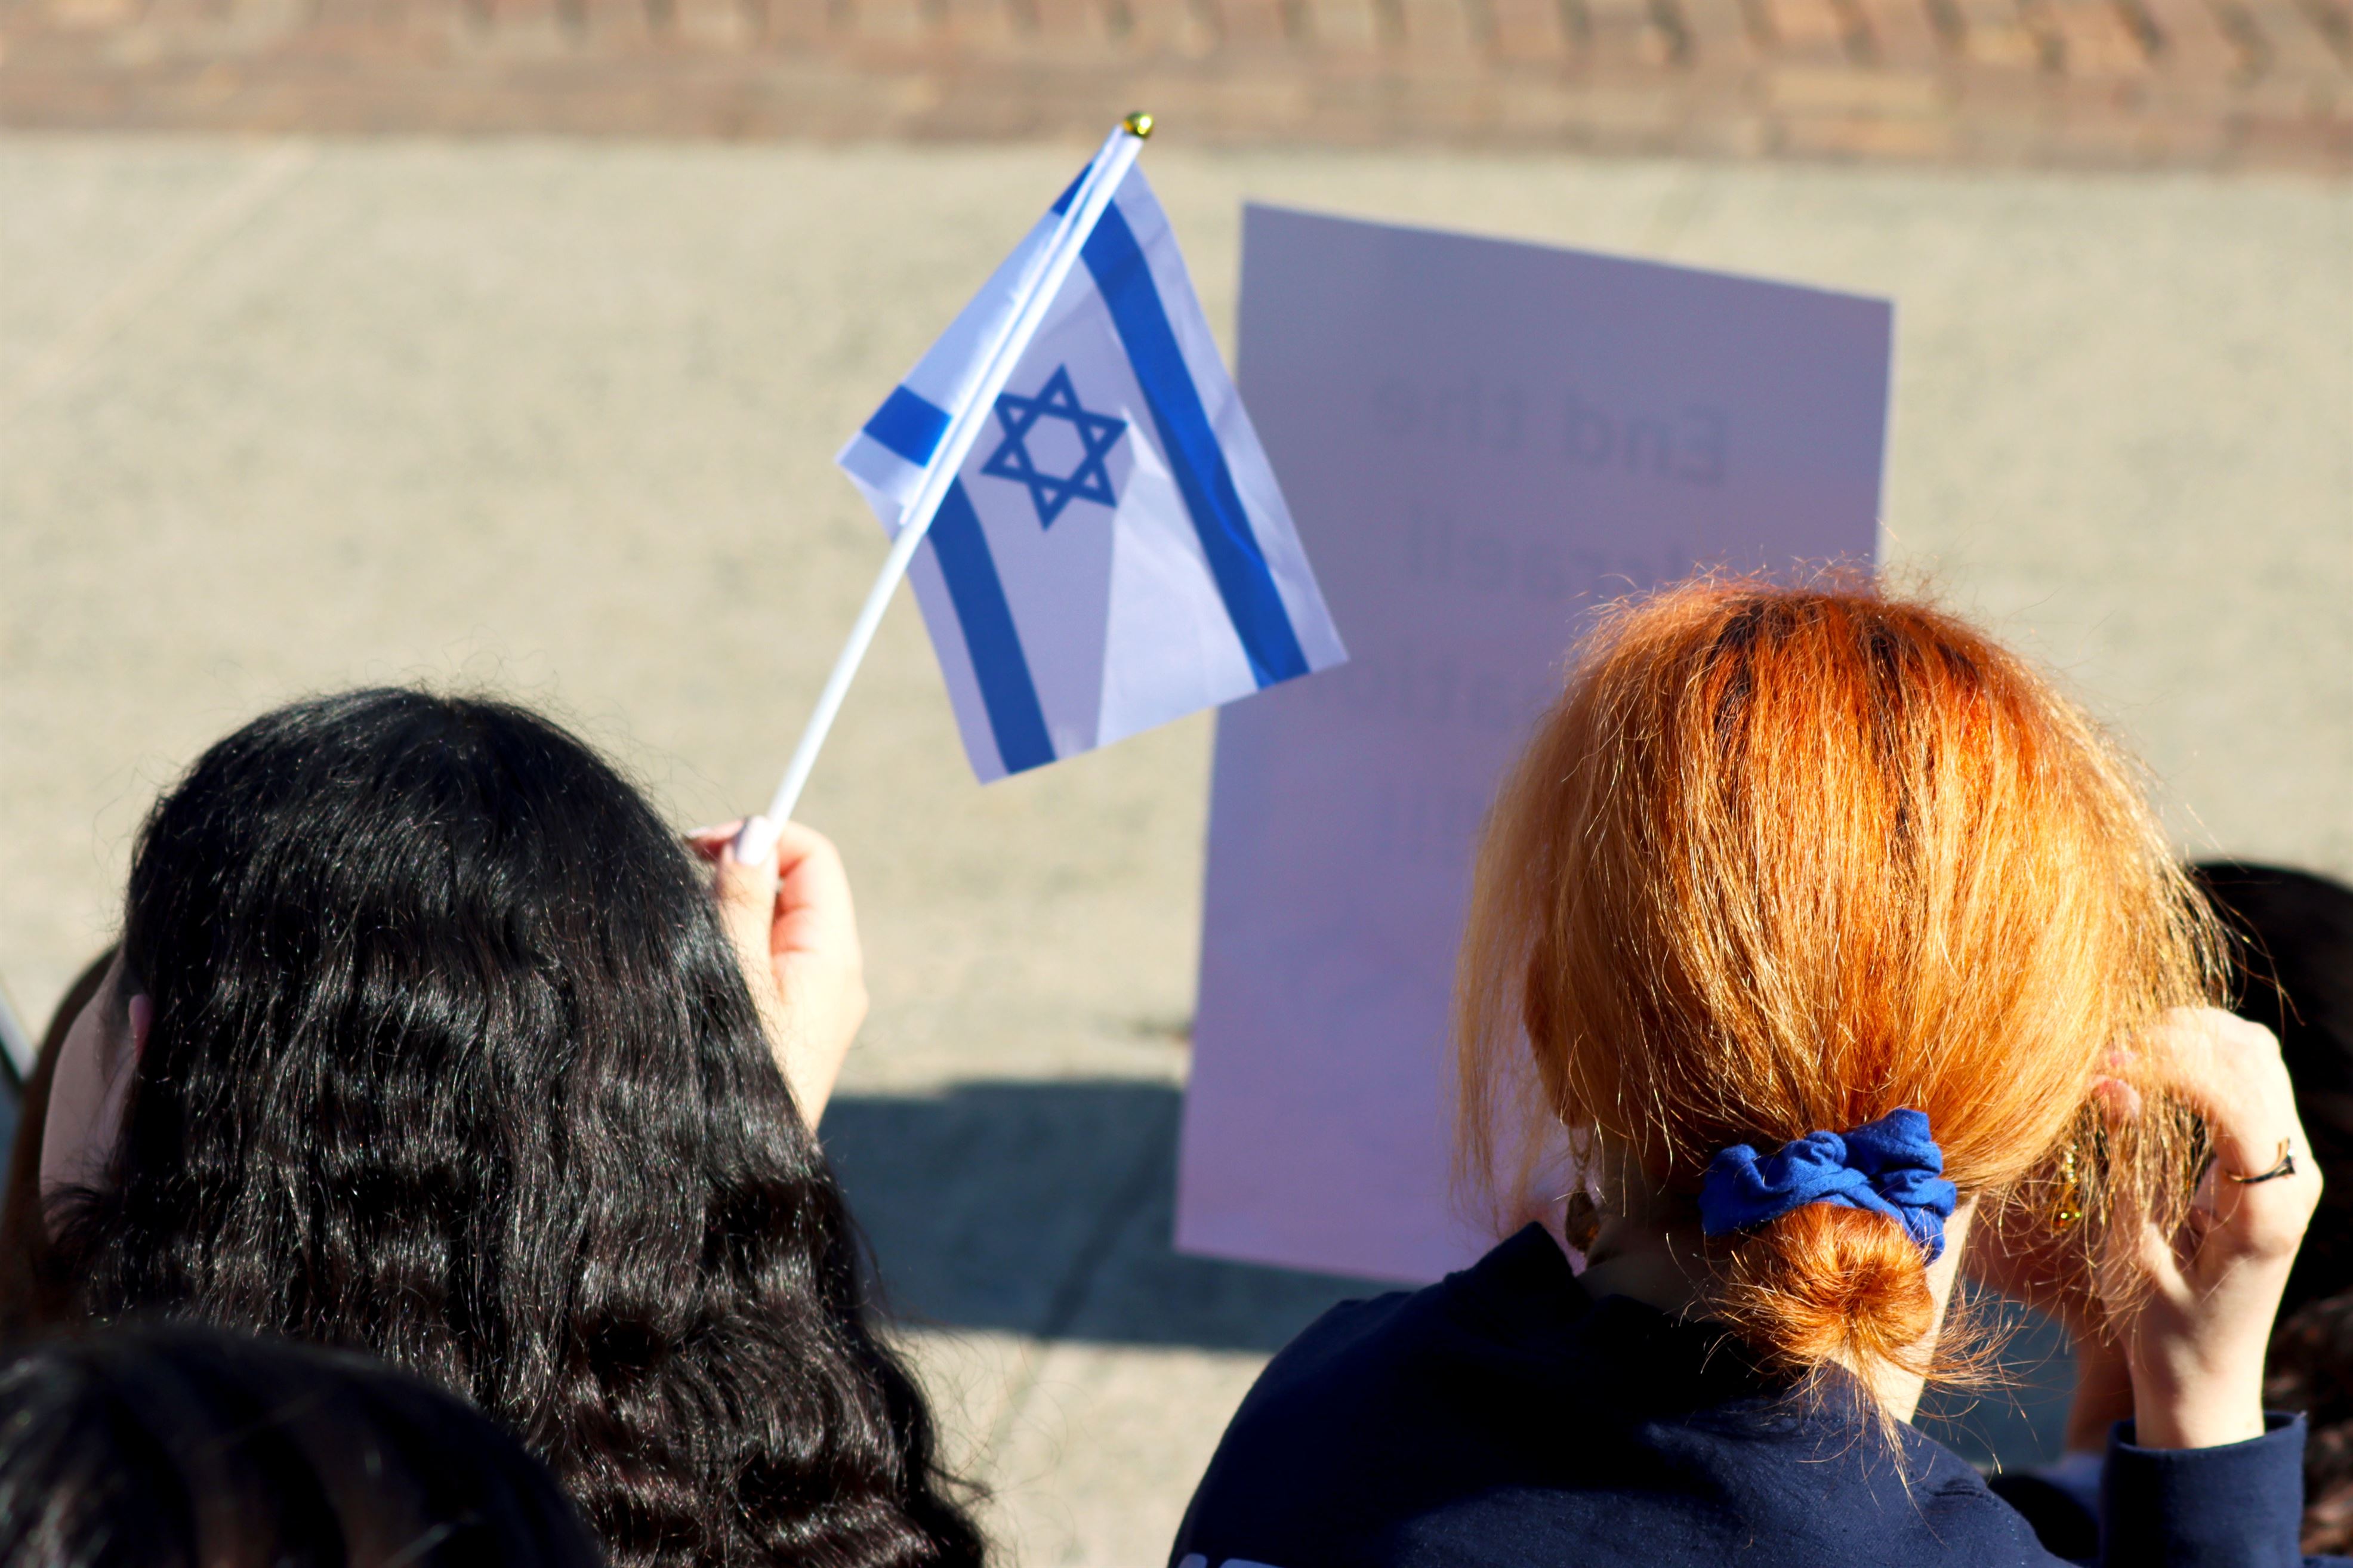 Counter-protestors wave the Israel flag outside the Student Center quad at Montclair State University. Photo by Claudia Martillo.